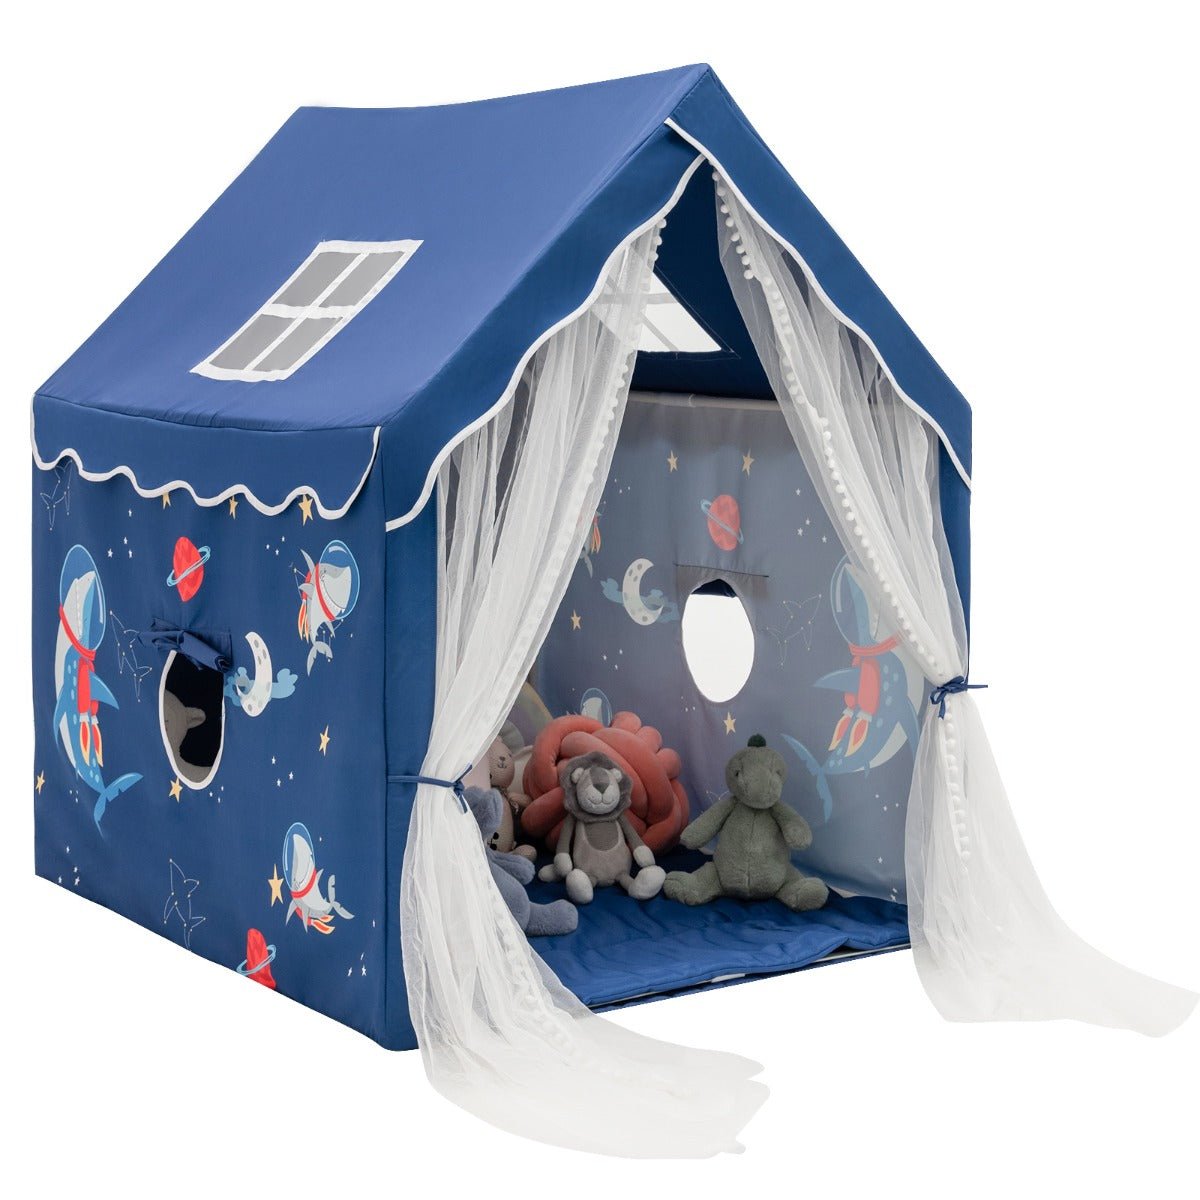 Large Blue Play Tent for Kids with Gauze Door Curtain: Inspiring Imaginations